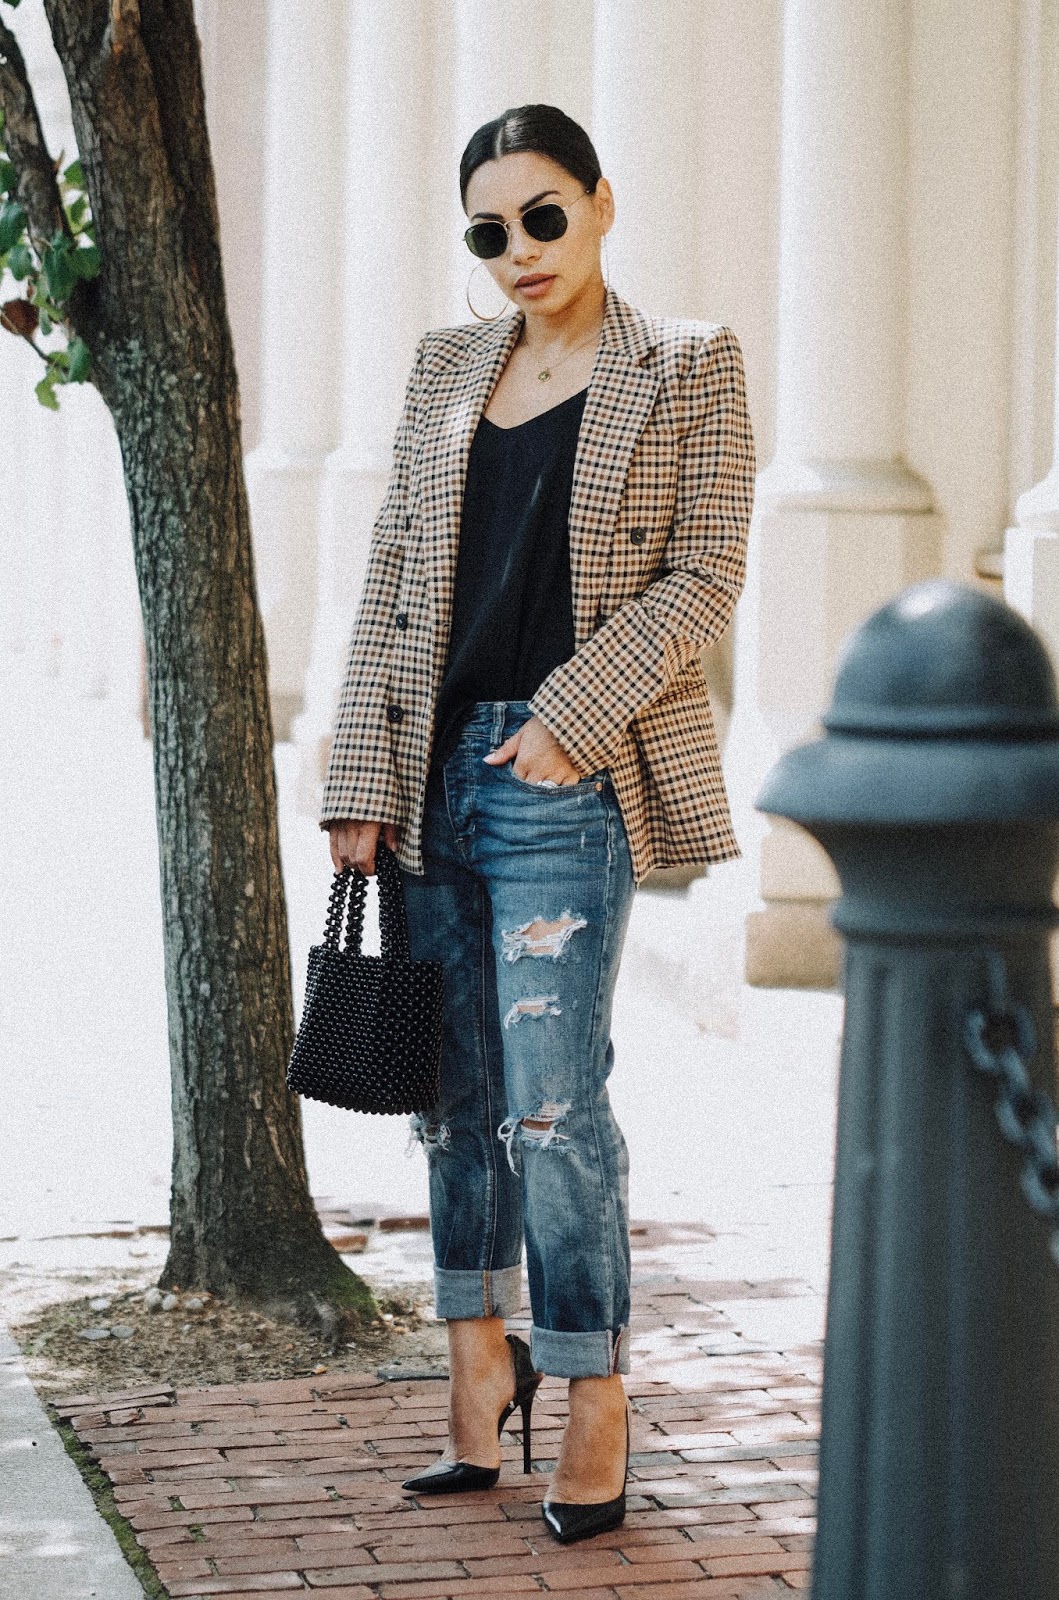 FALL'S MOST VERSATILE PIECE: THE BLAZER | The Style Brunch